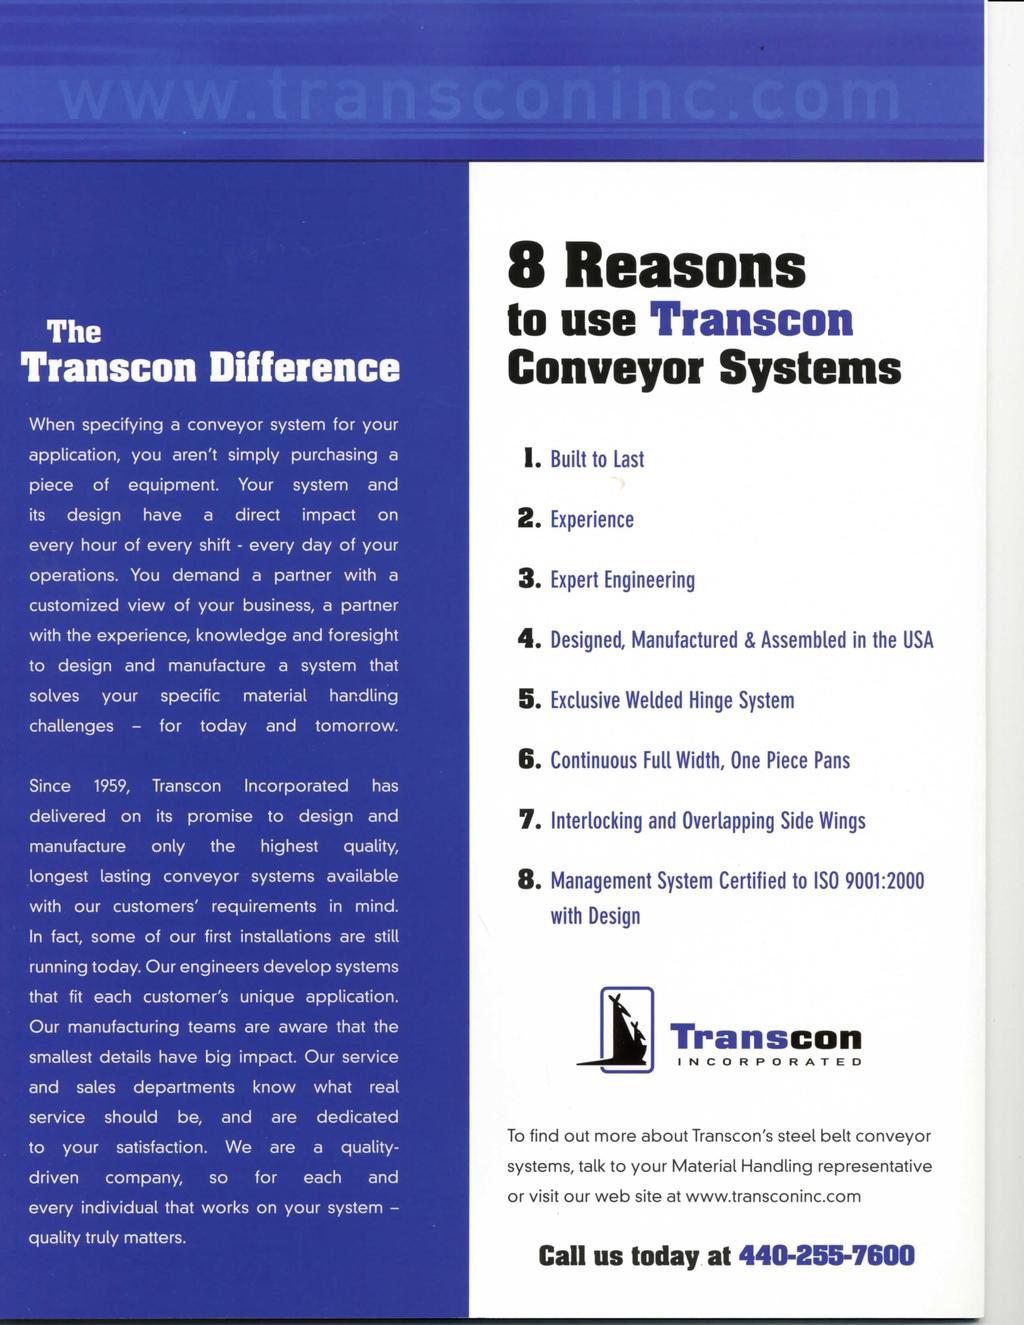 The Transcon Difference 8 Reasons to use Transcon When specifying a conveyor system for your application, you aren't simply purchasing a piece of equipment.